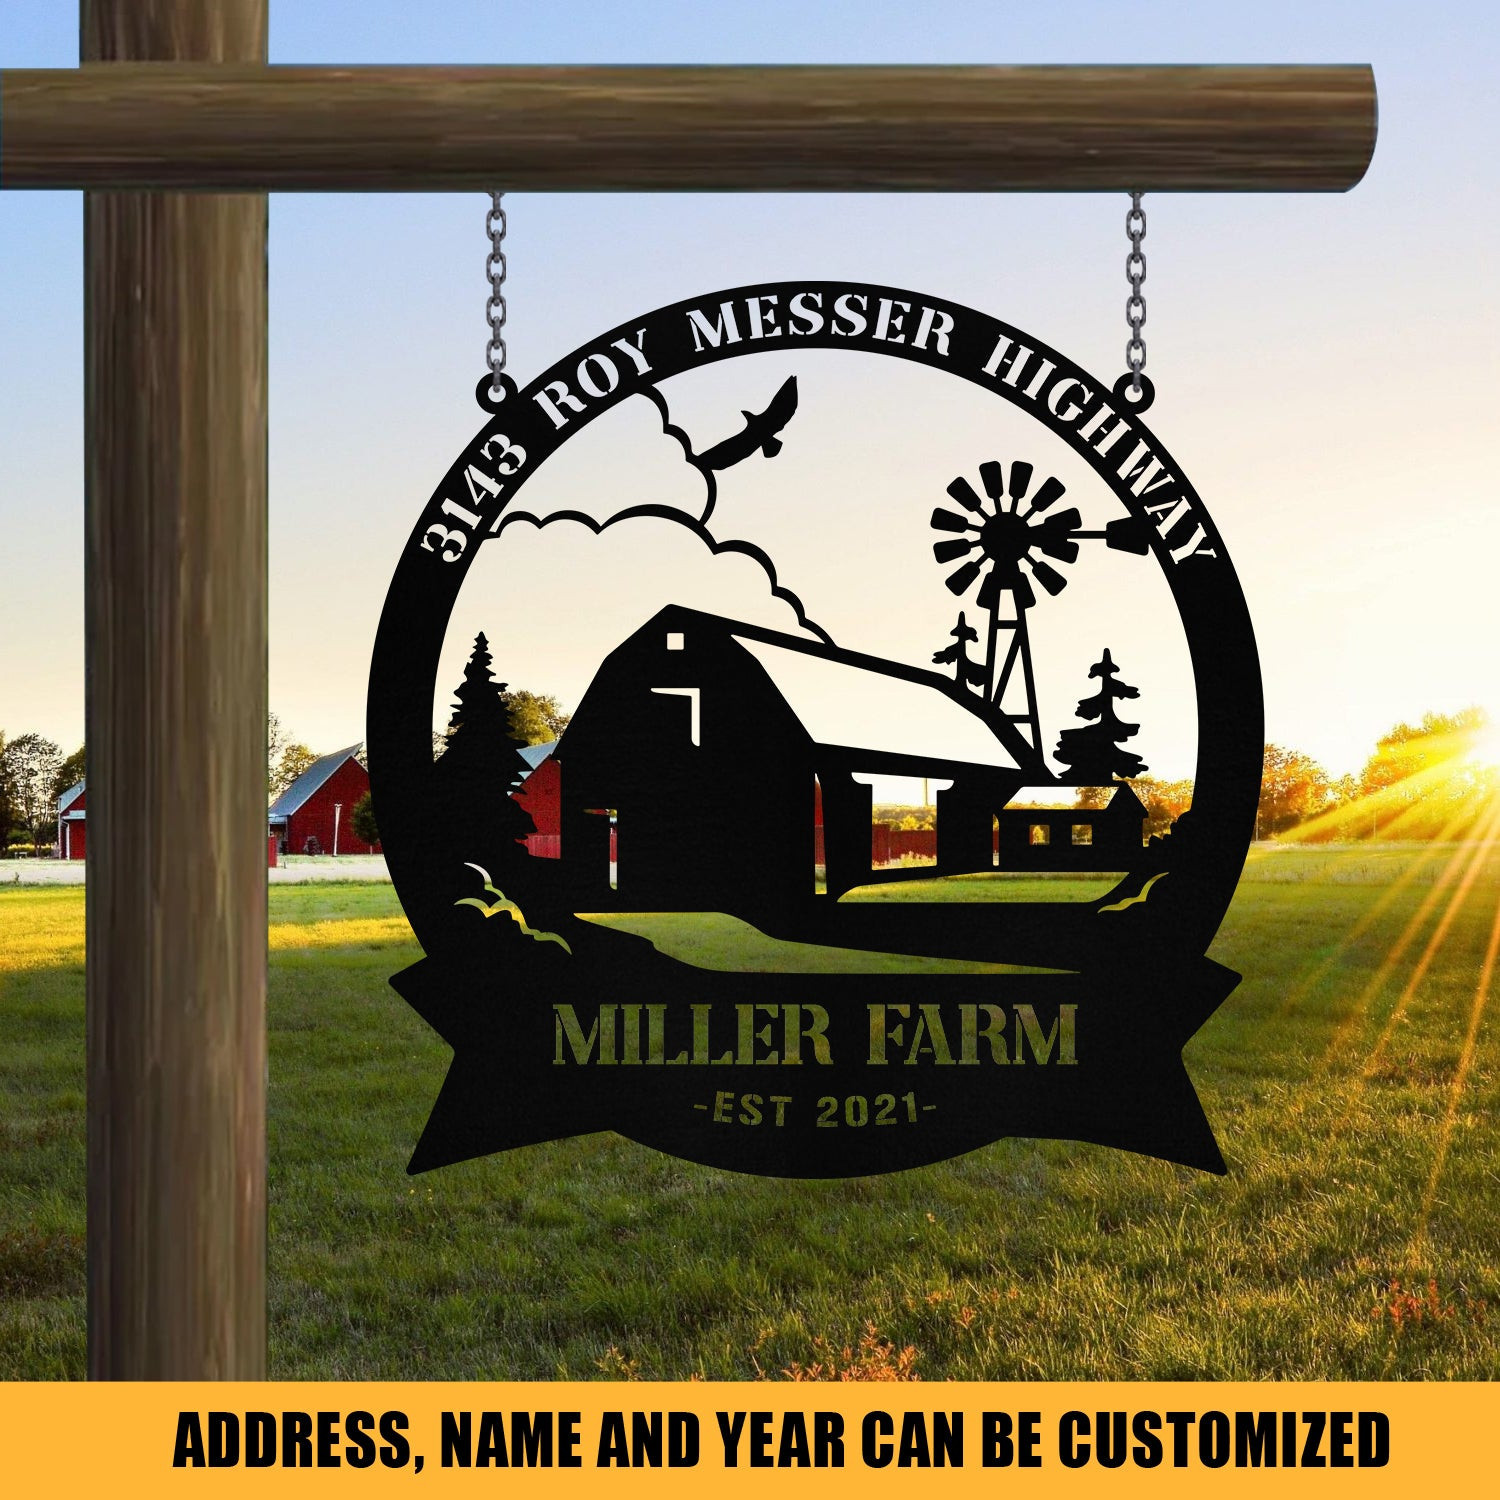 Personalized Metal Farm Sign Barn Windmill, Custom Outdoor, Entry Road, Front Gate, Metal Laser Cut Metal Signs Custom Gift Ideas 12x12IN